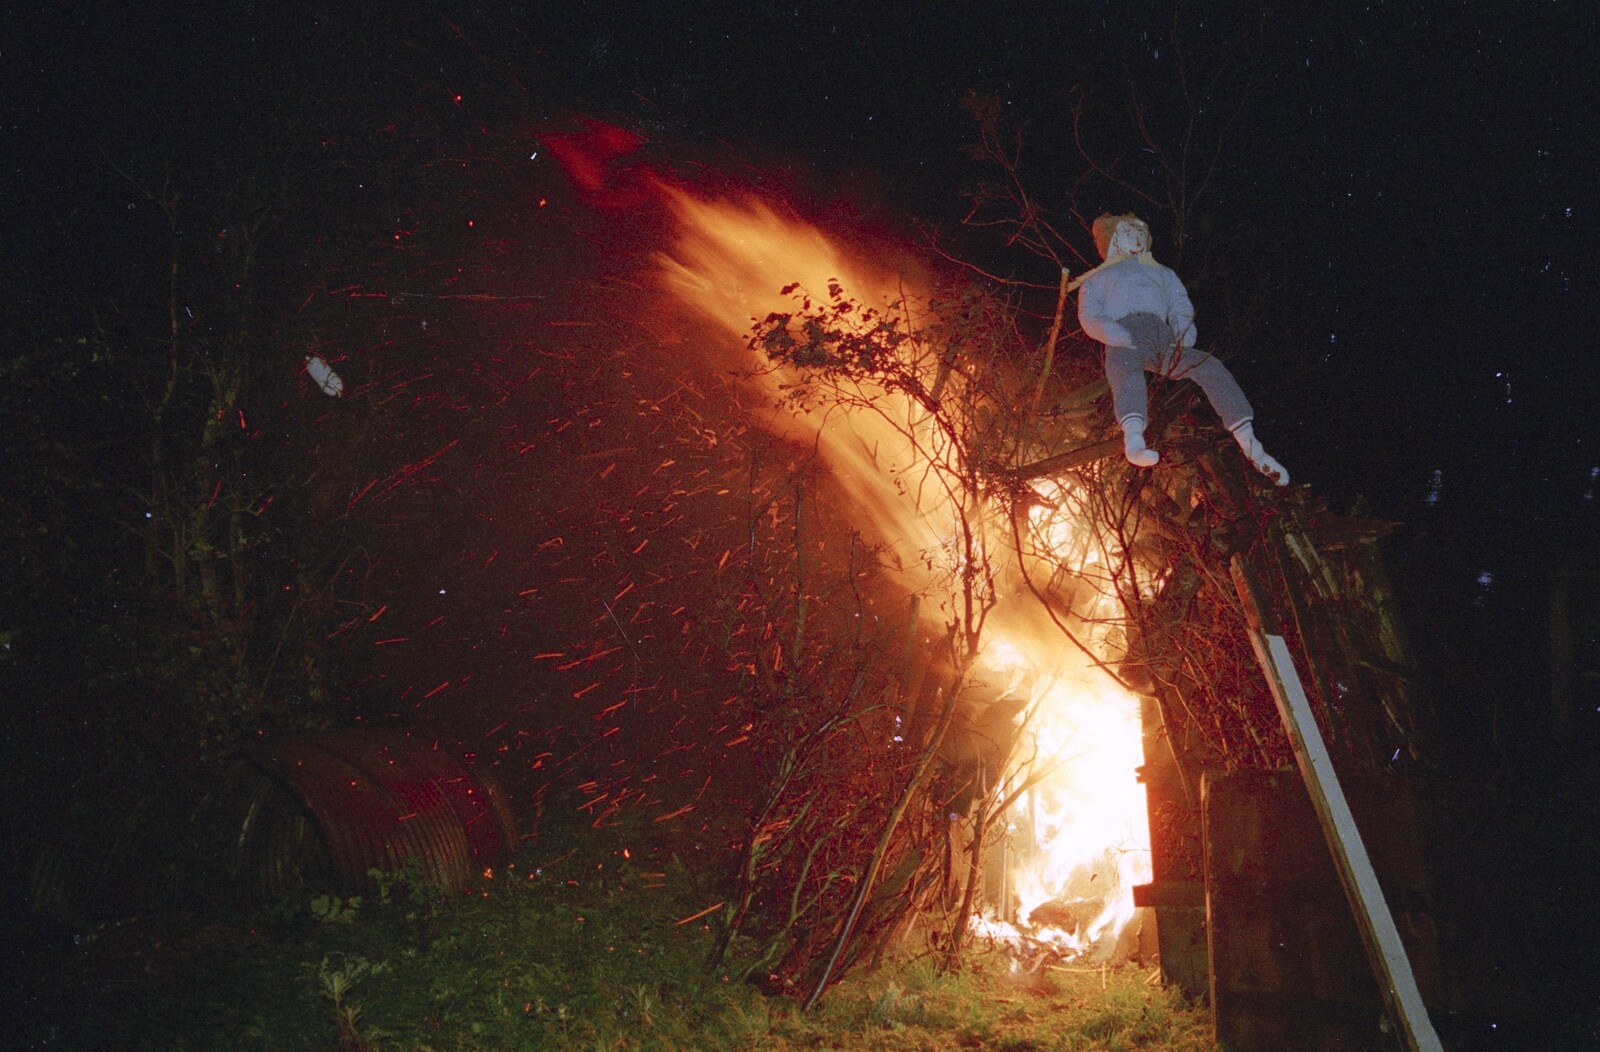 The guy is about to be flambéed from Bonfire Night, Stuston, Suffolk - 5th November 1990